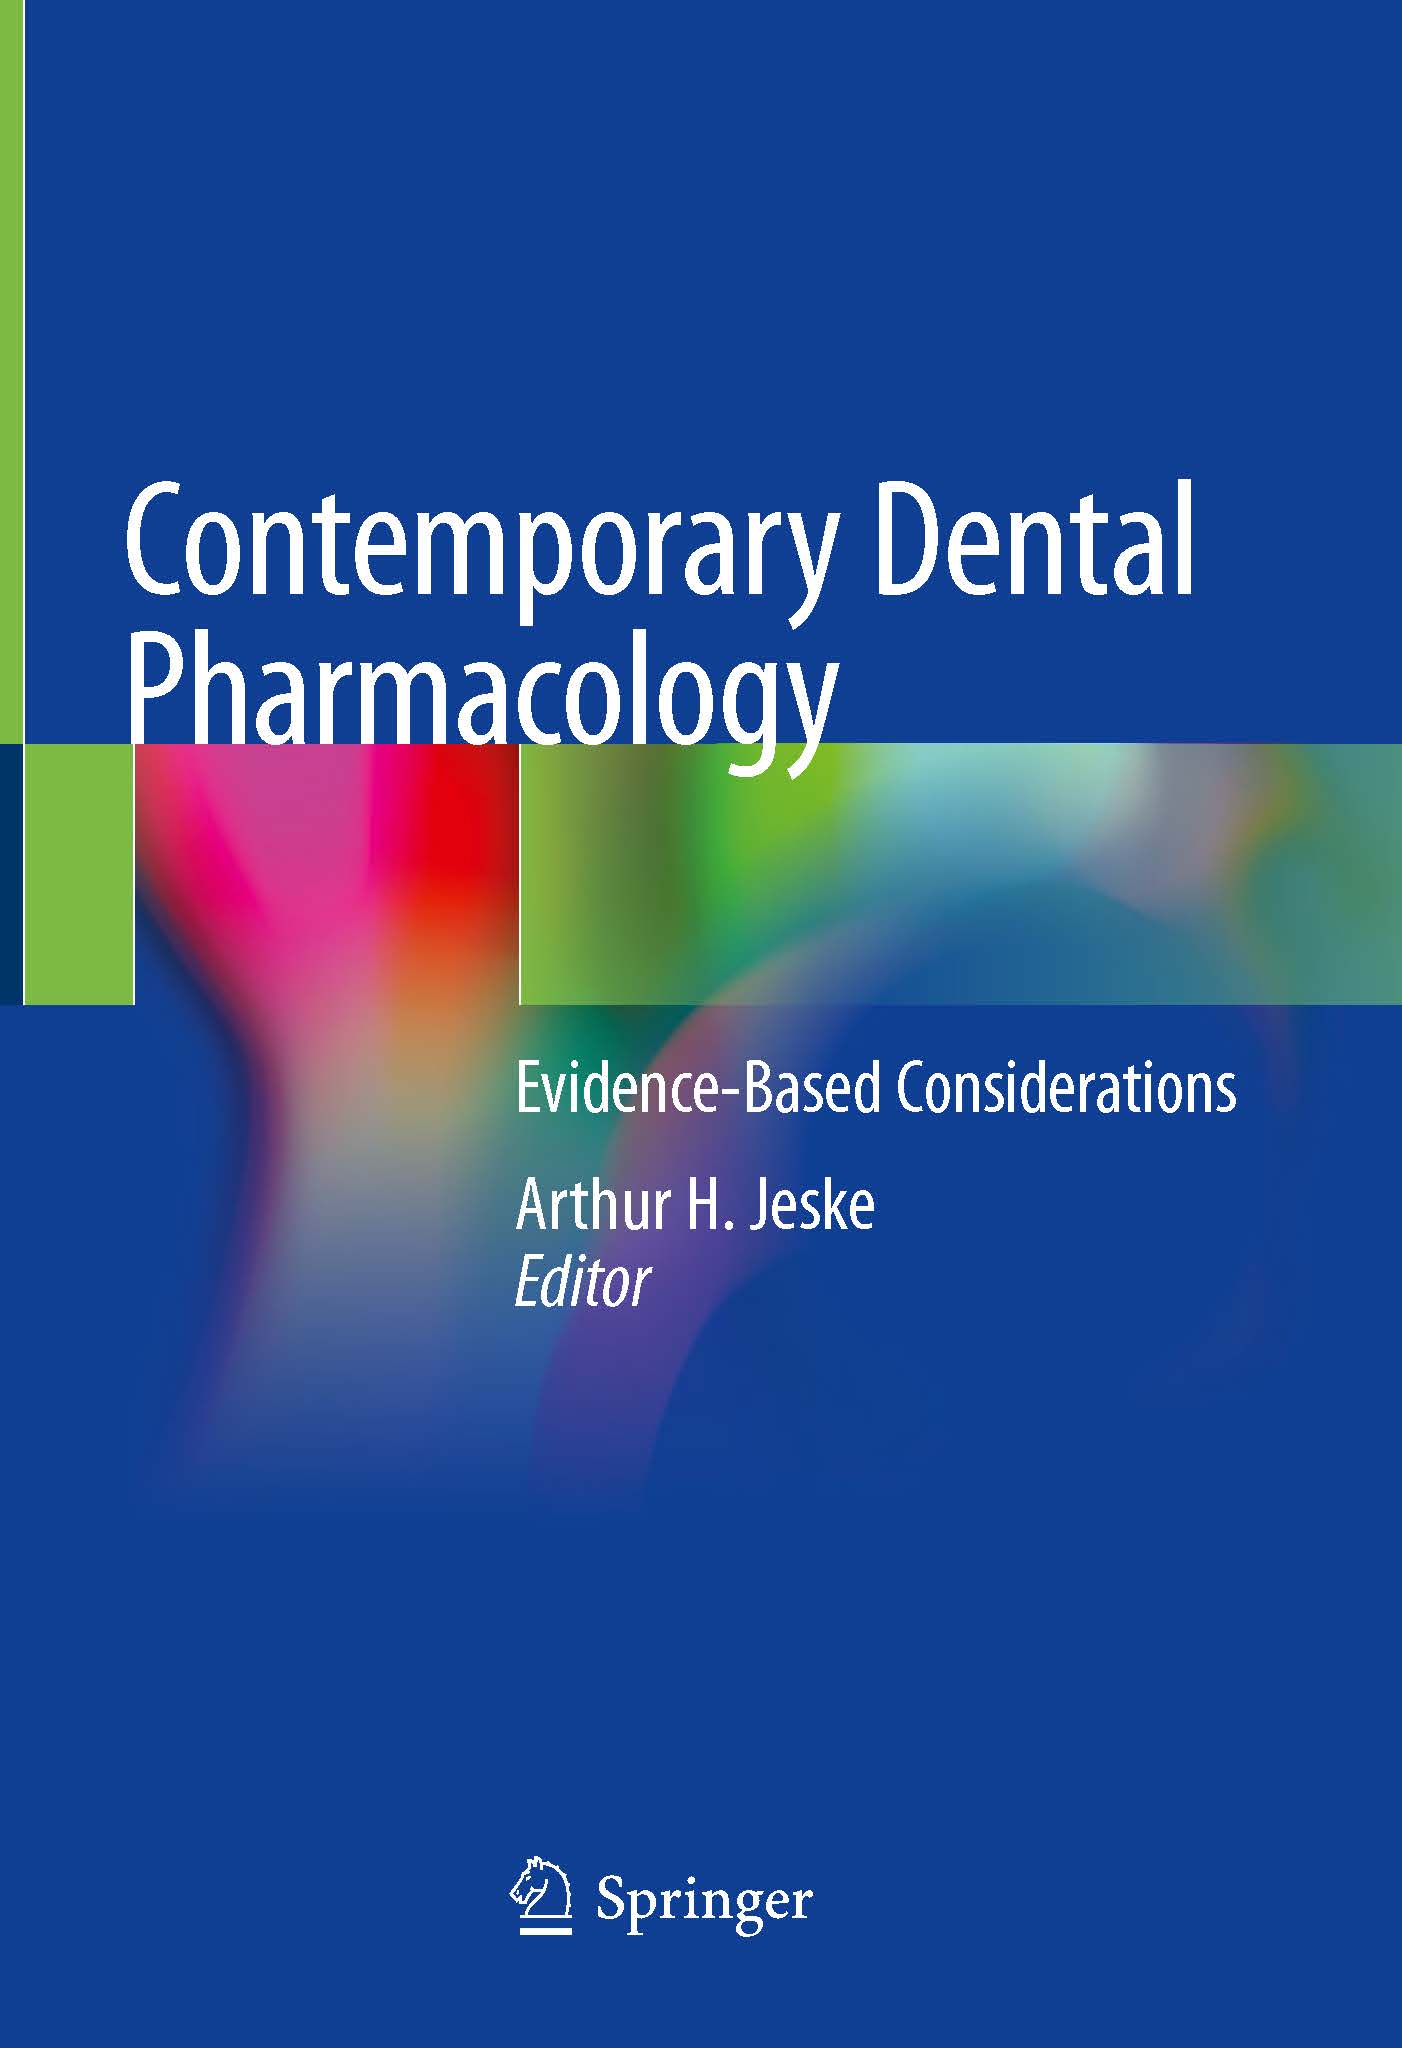 Contemporary Dental Pharmacology: Evidence-Based Considerations